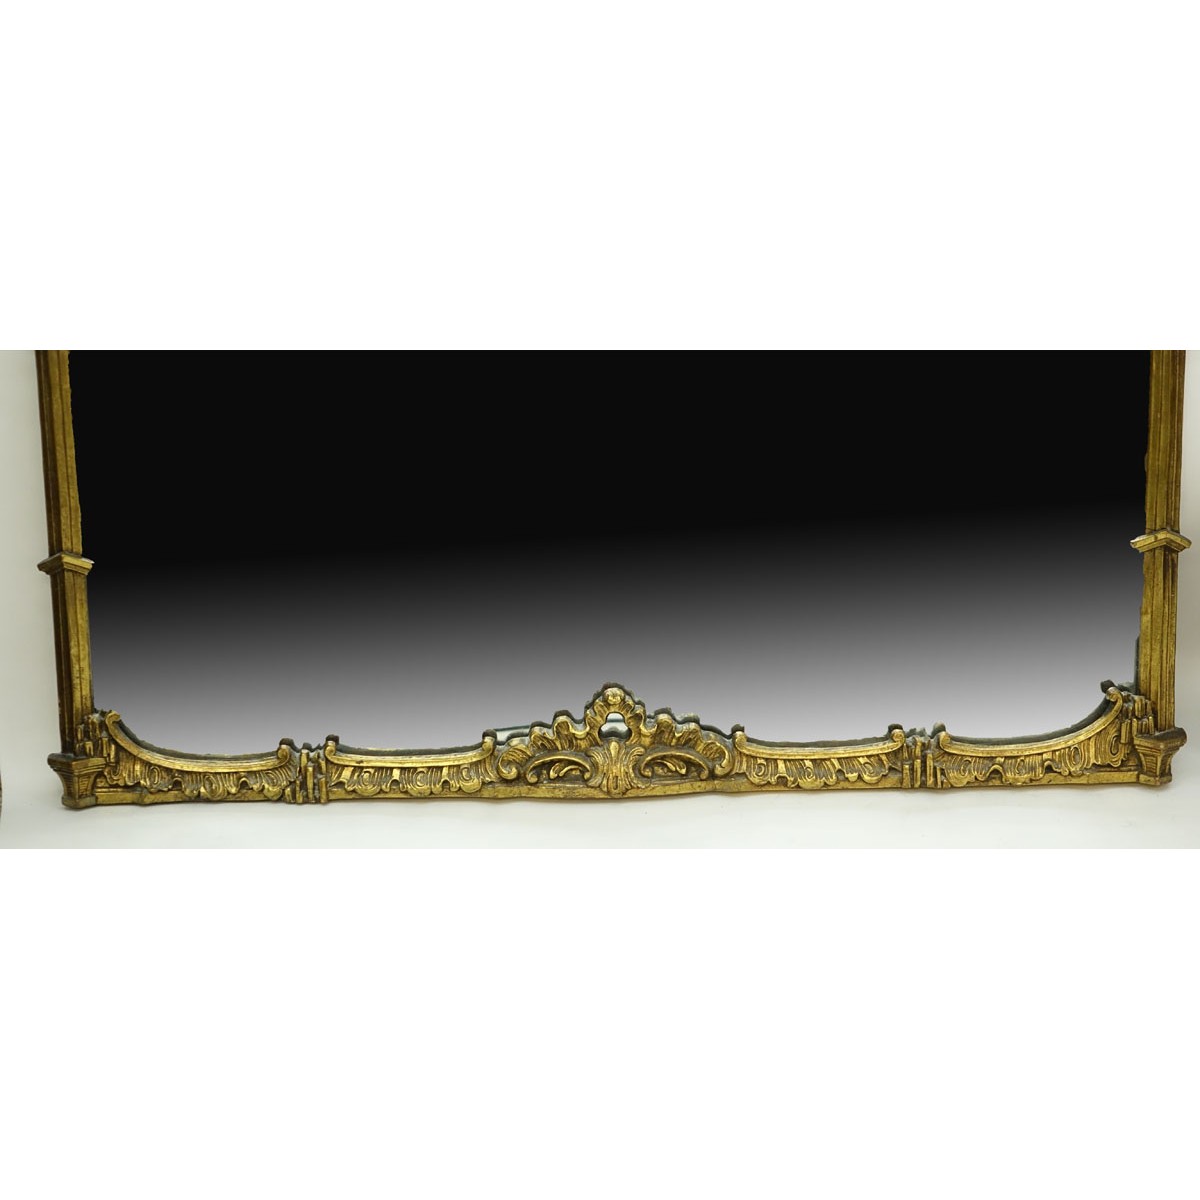 Antique Style Italian Giltwood Carved Mirror. Rubbing to gilt, scuffs and scratches to frame.